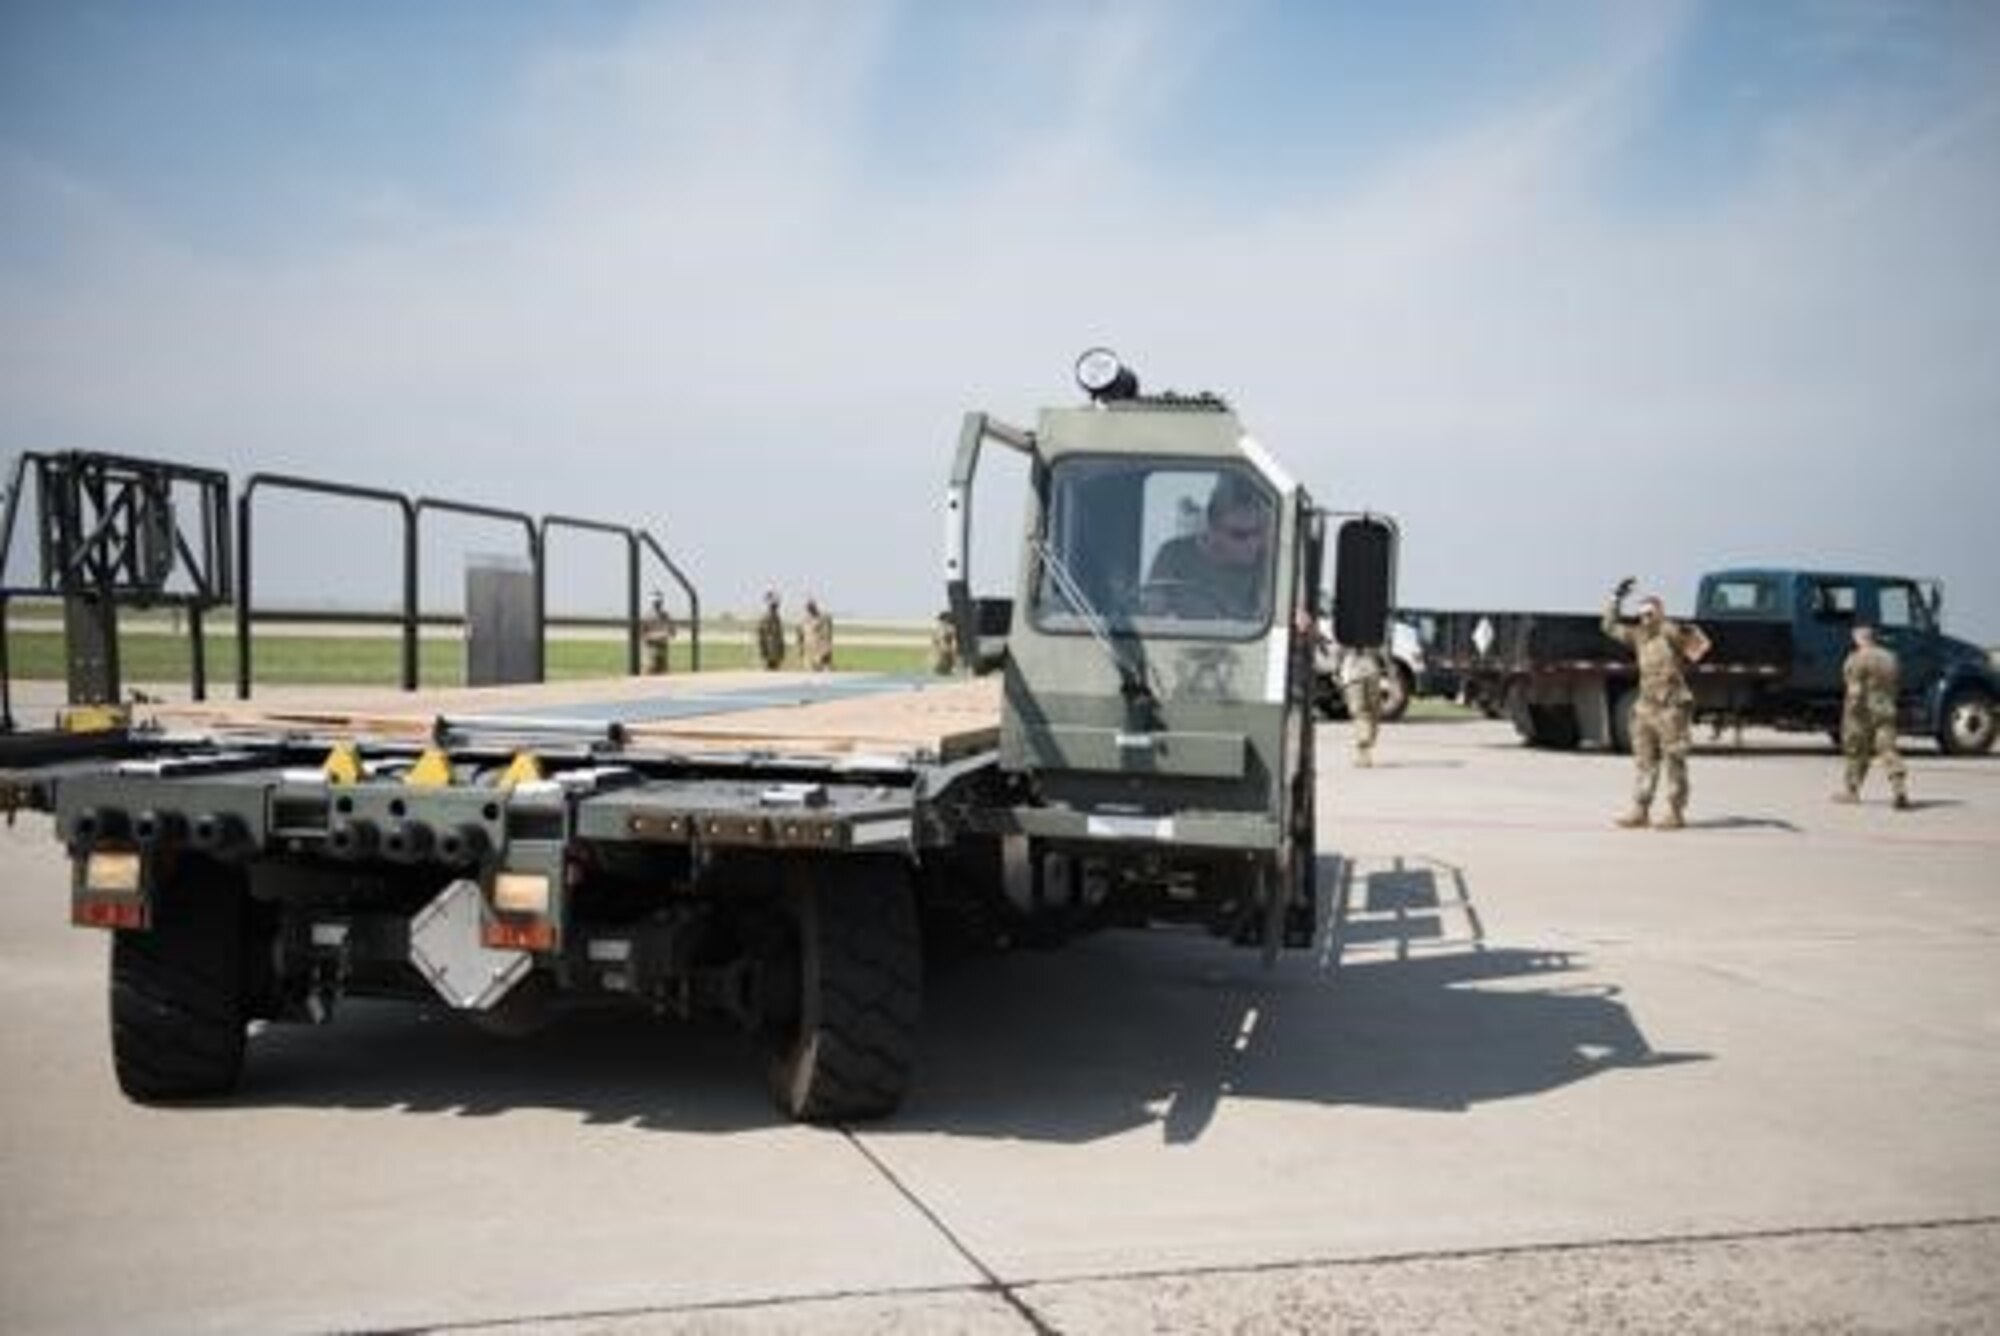 An Airman from the 5th Logistics Readiness Squadron hauls cargo at Minot Air Force Base, North Dakota, May 20, 2020. The 5th LRS modified pallets with rollers in order to efficiently change the way they work missions. (U.S. Air Force photo by Senior Airman Dillon Audit)